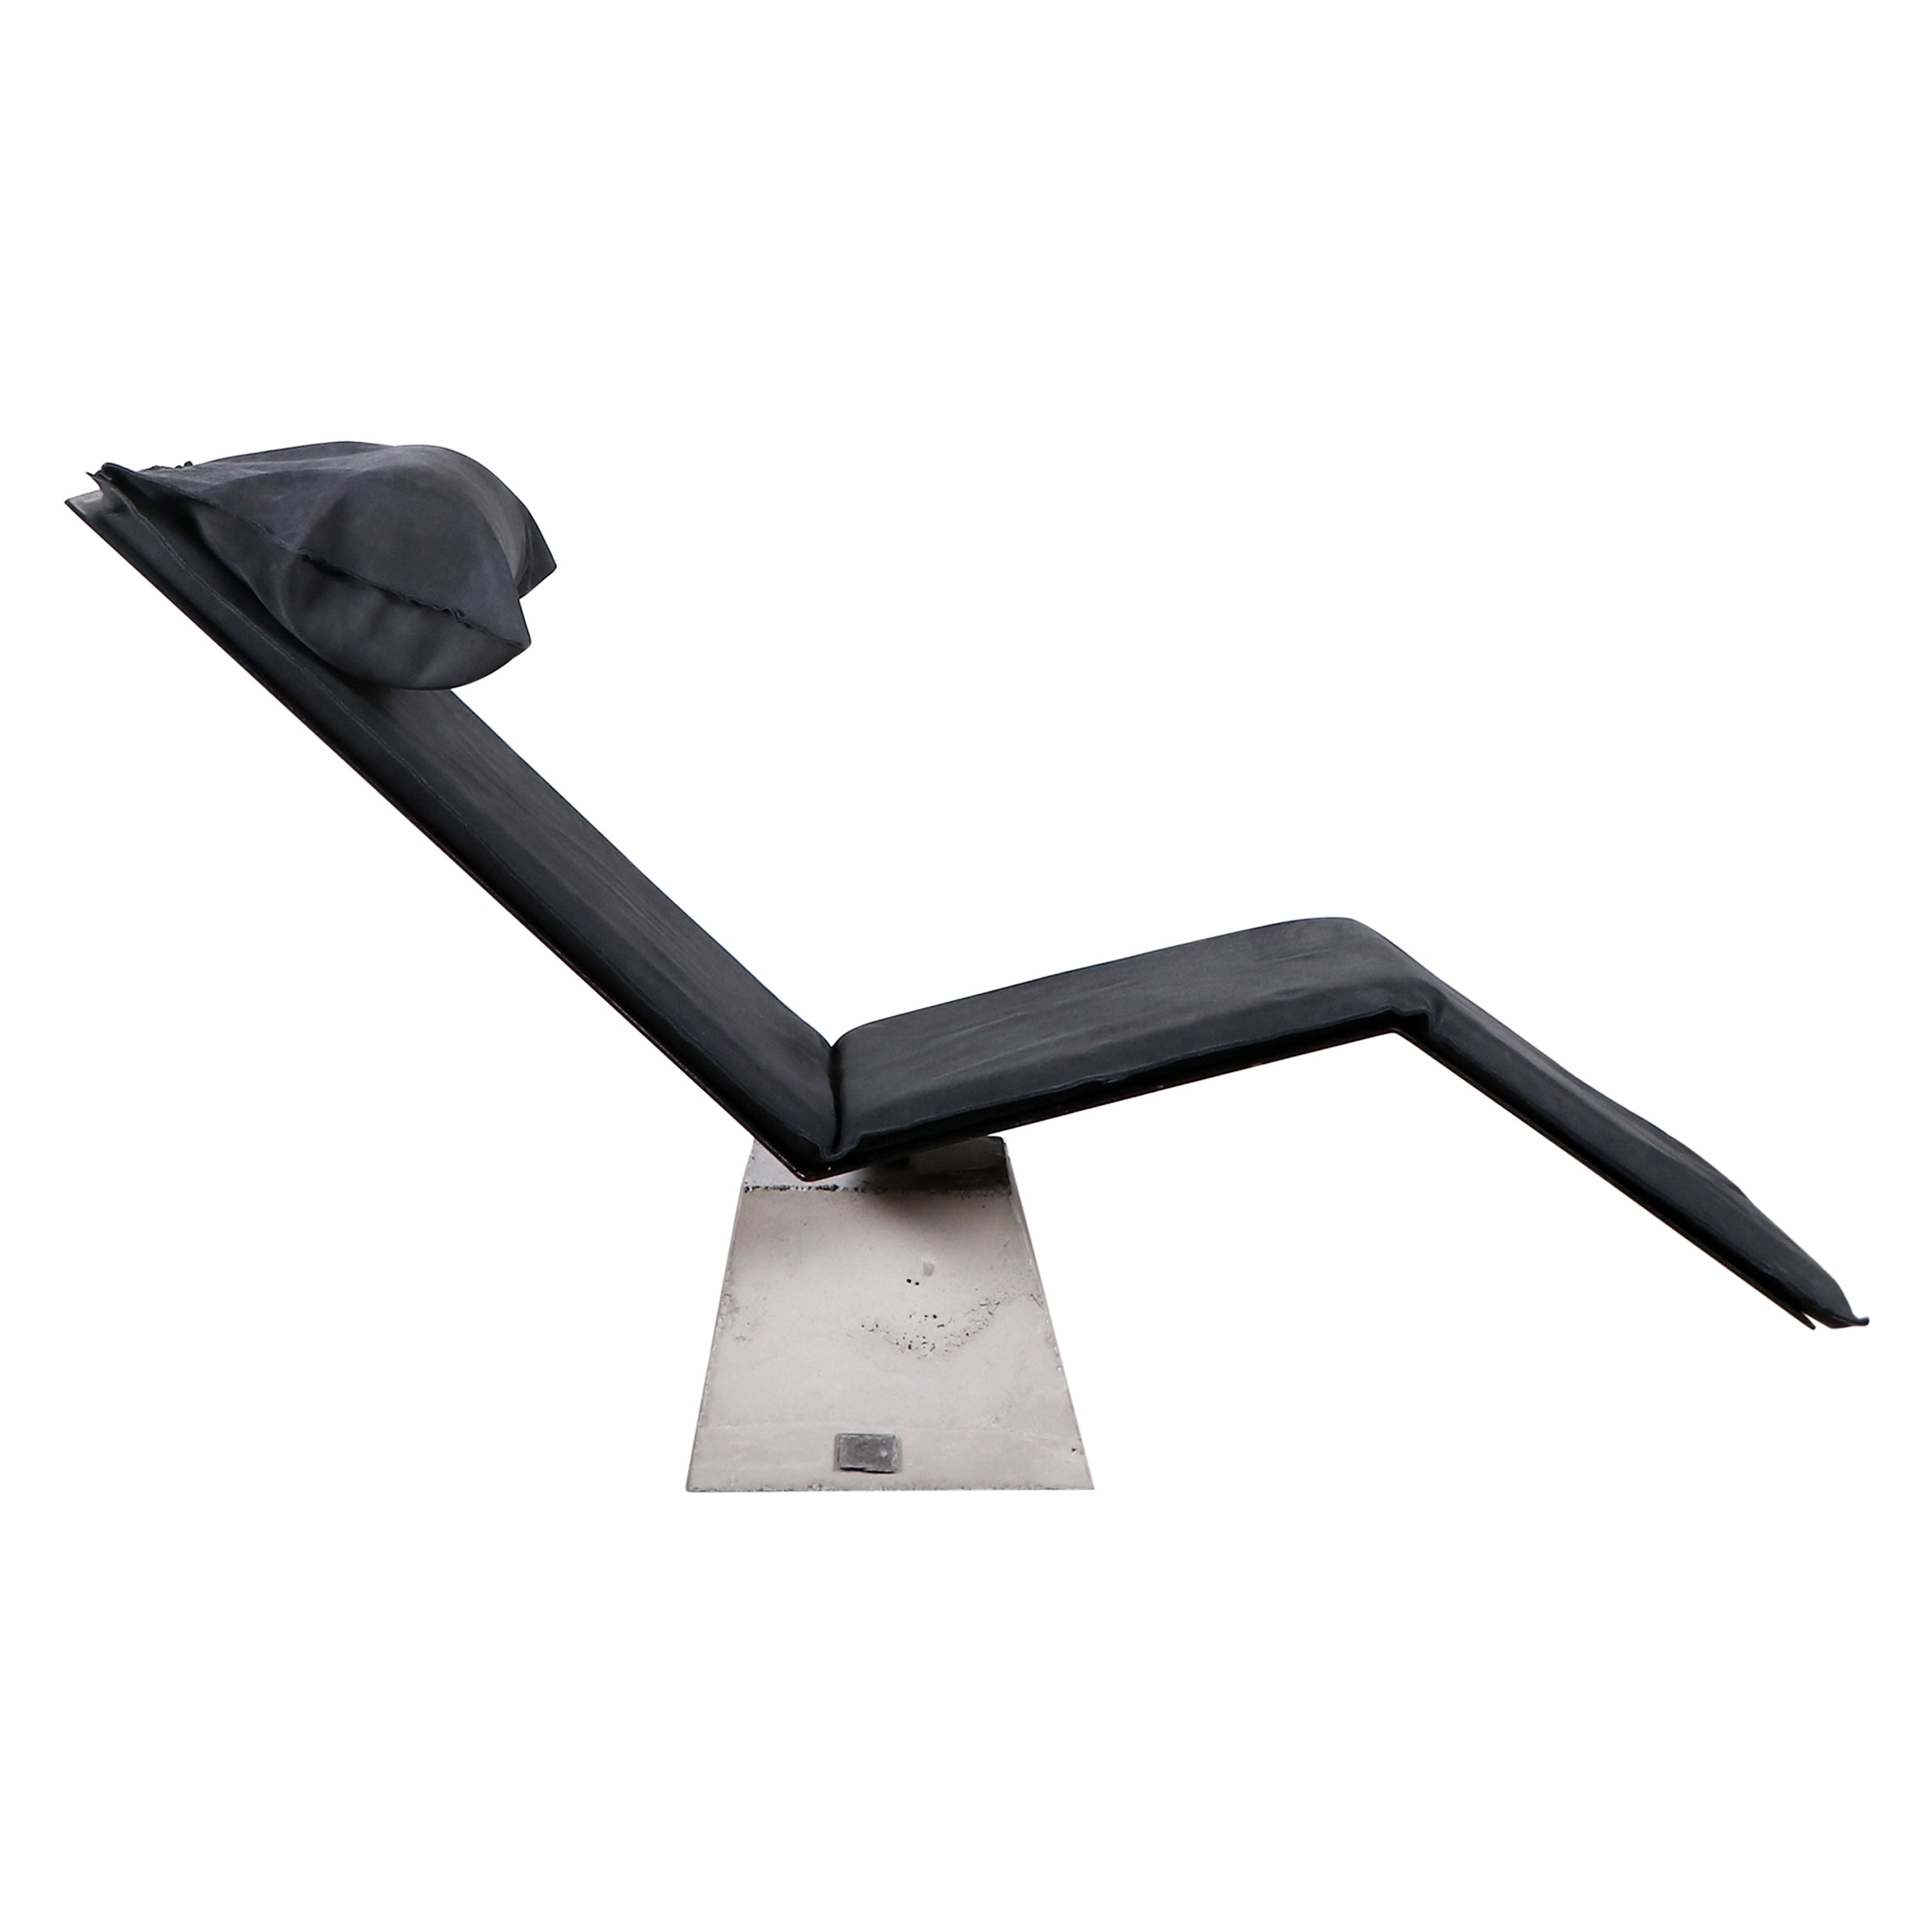 Contemporary Black Lounge Chair / Chaise Lounge, Flykt Chair by Lucas Morten